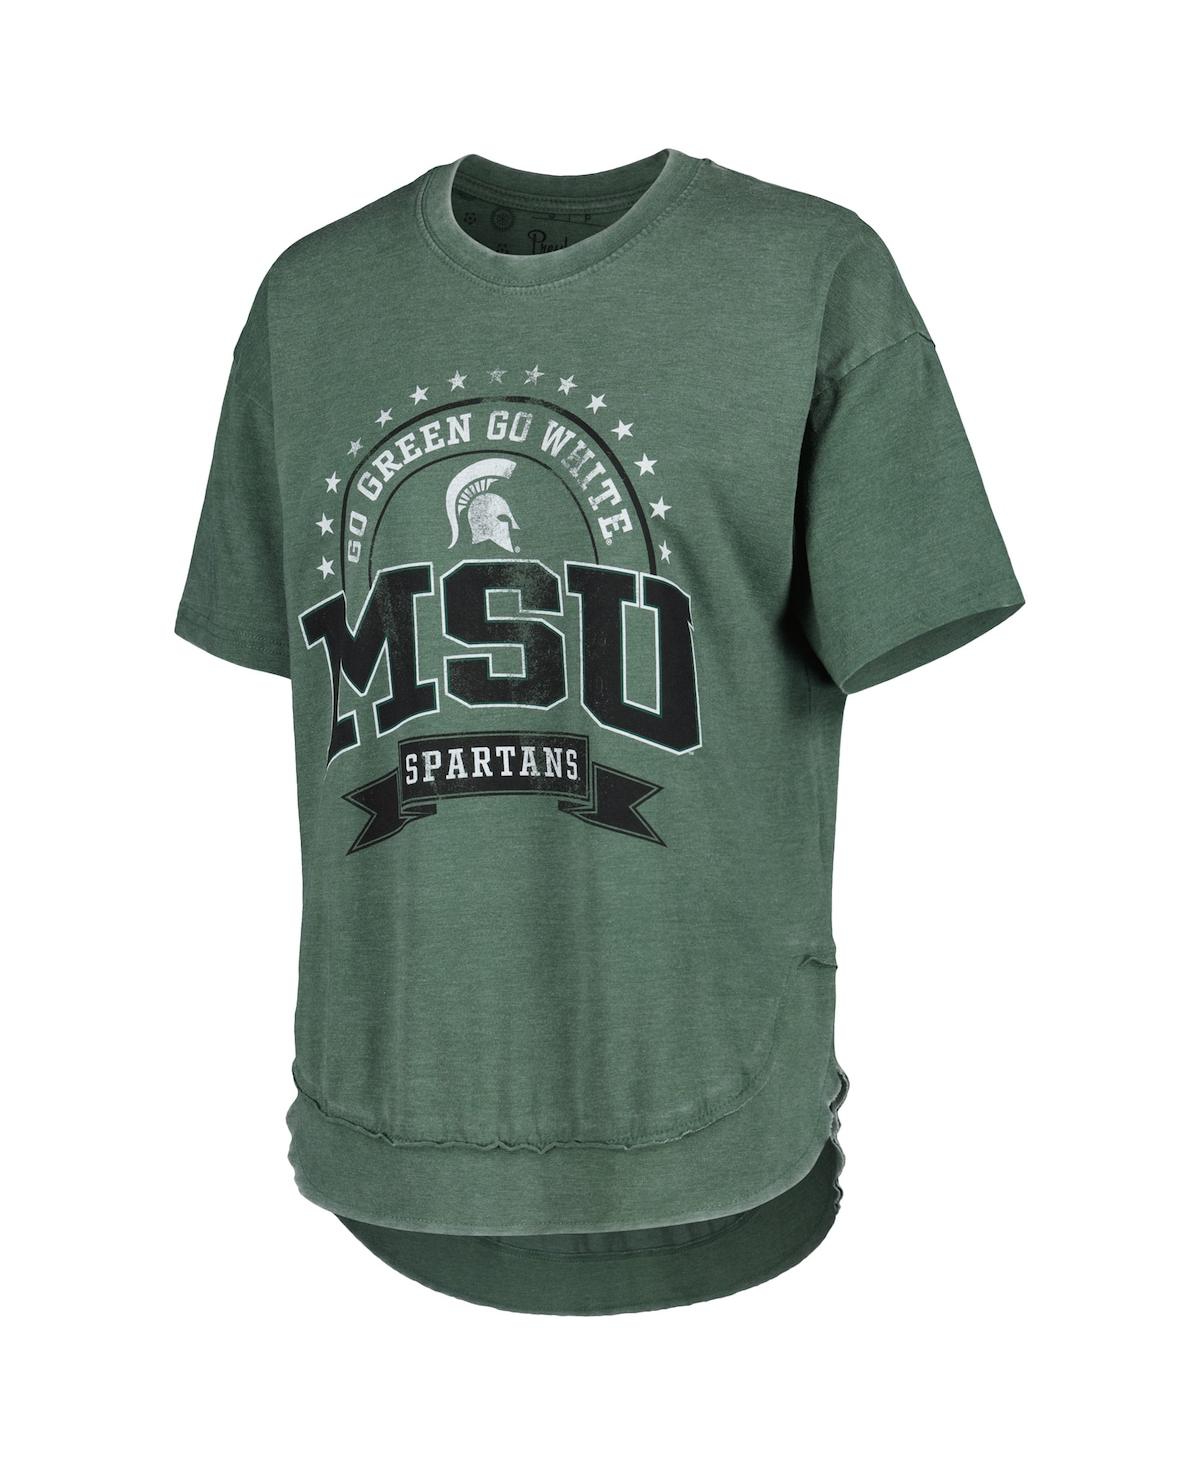 Shop Pressbox Women's  Heather Green Distressed Michigan State Spartans Vintage-like Wash Poncho Captain T